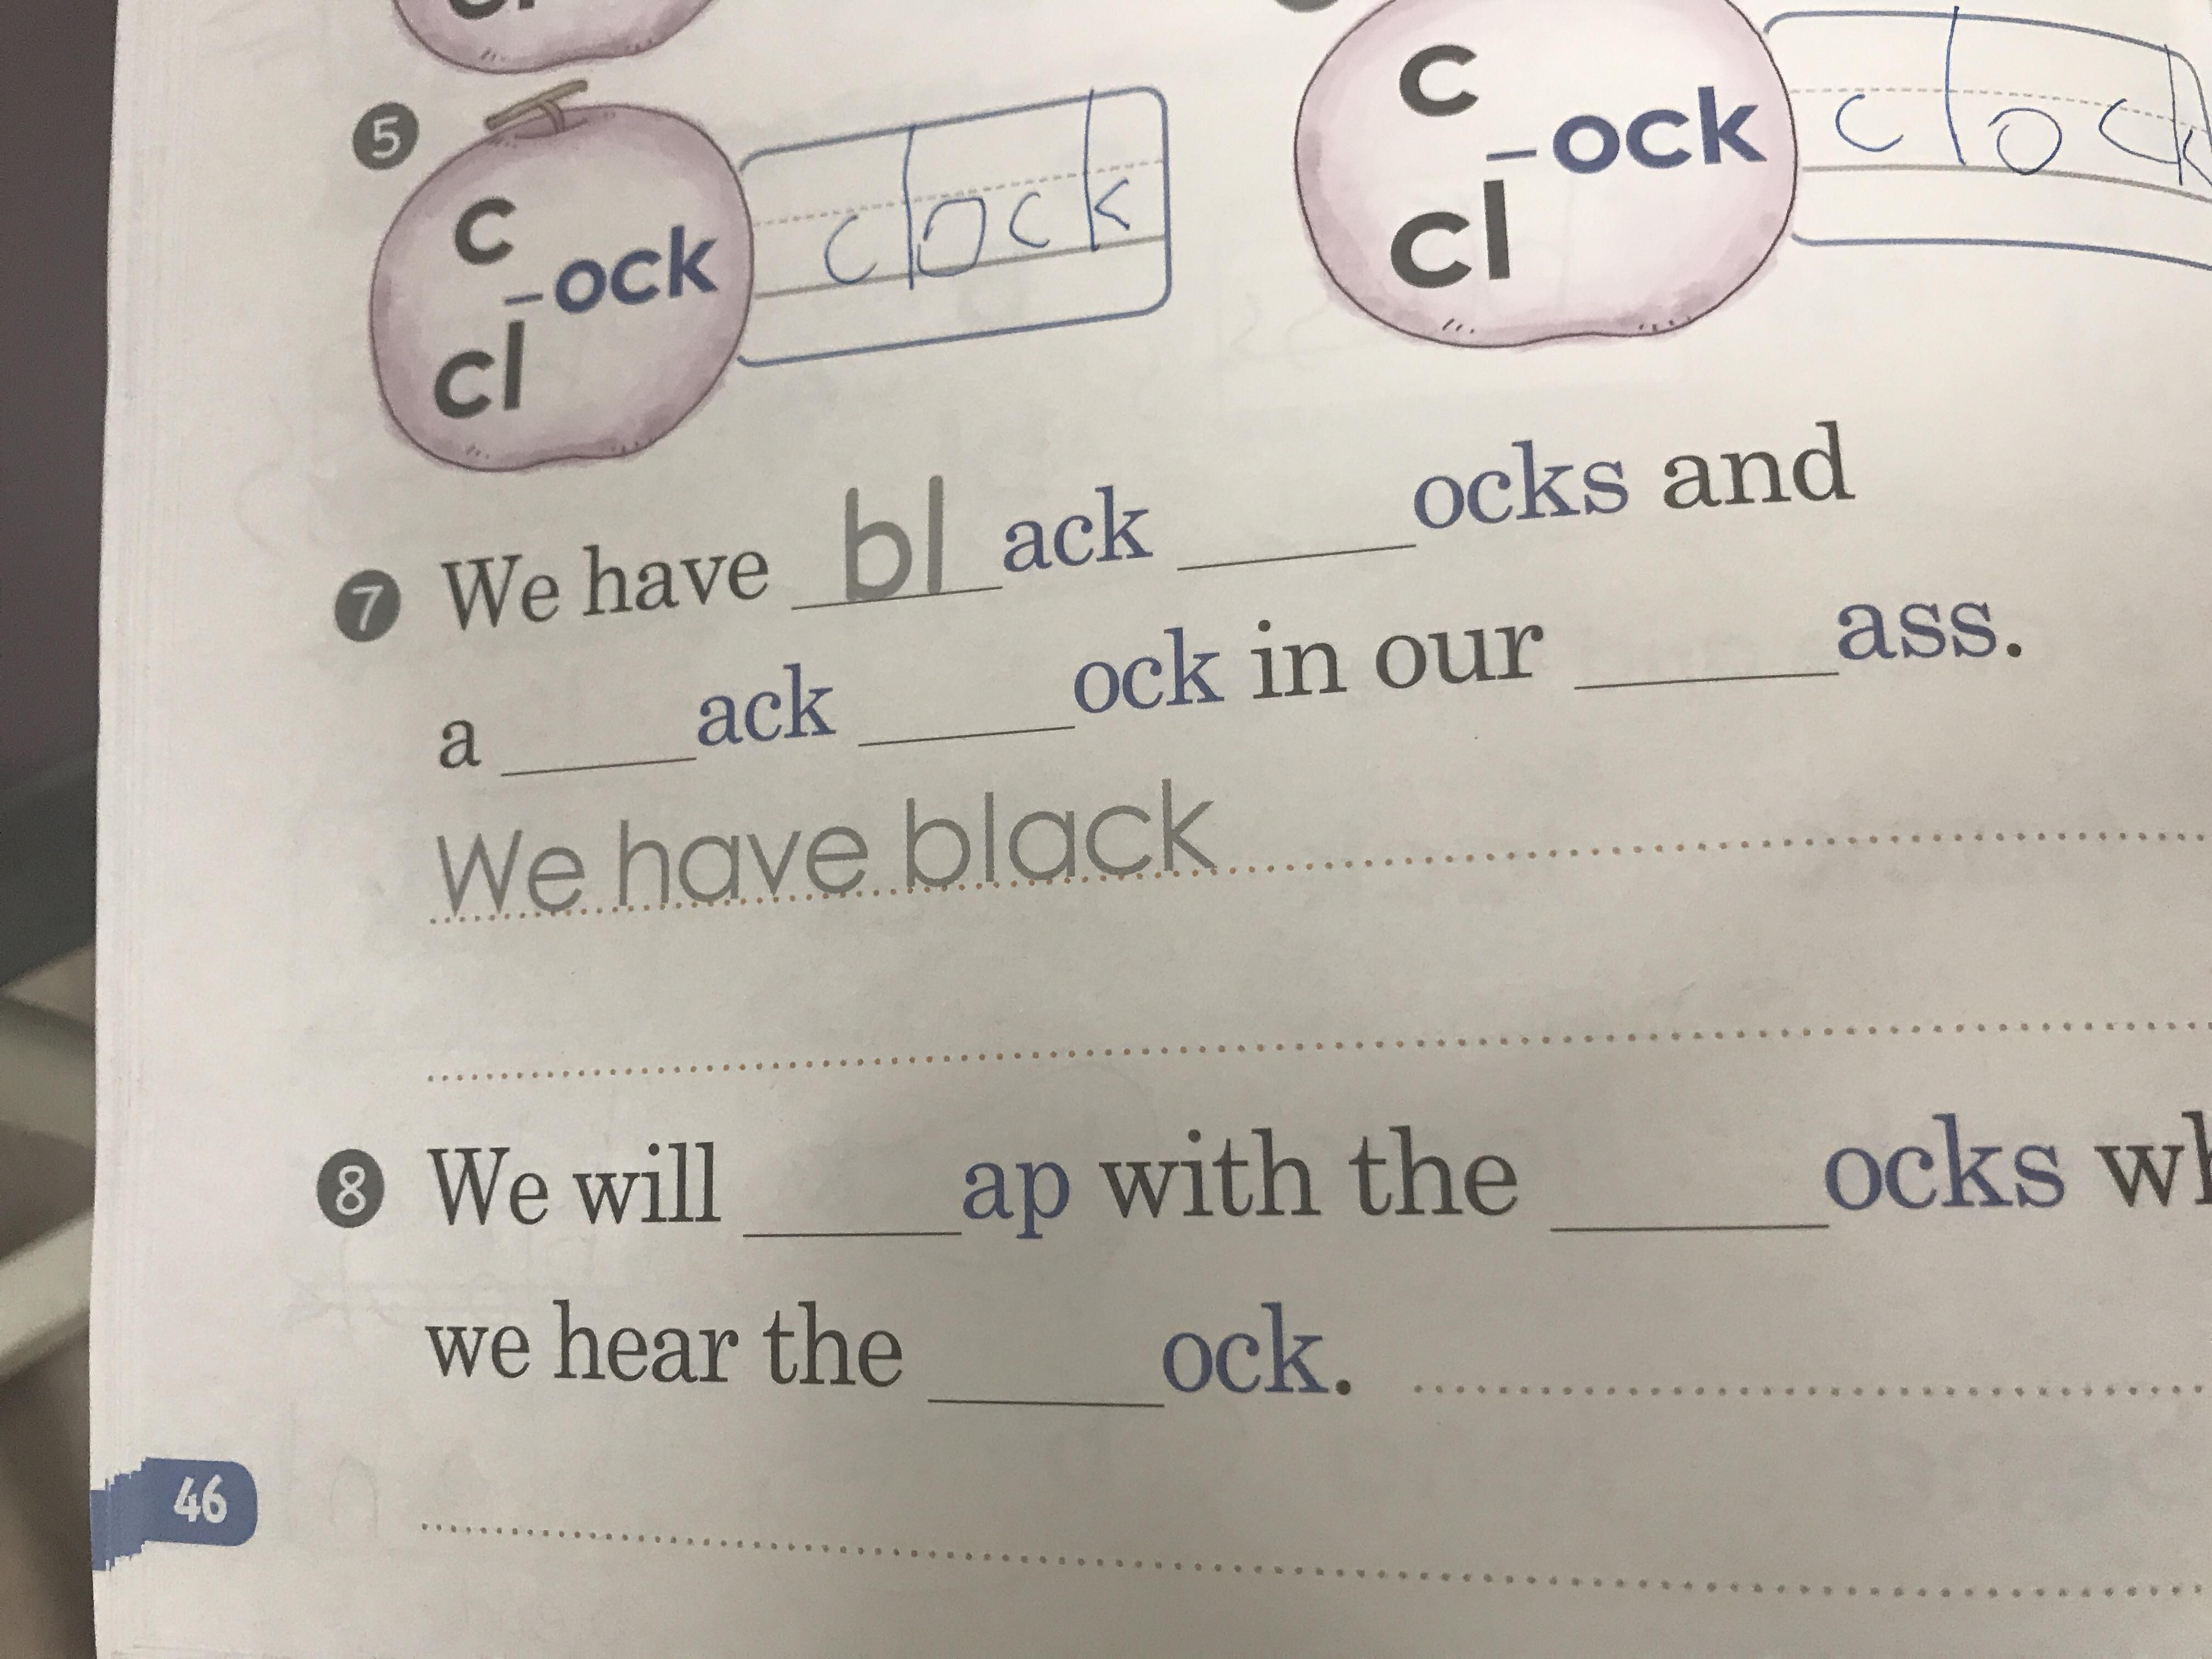 So I teach English abroad and this was my student's phonics book.